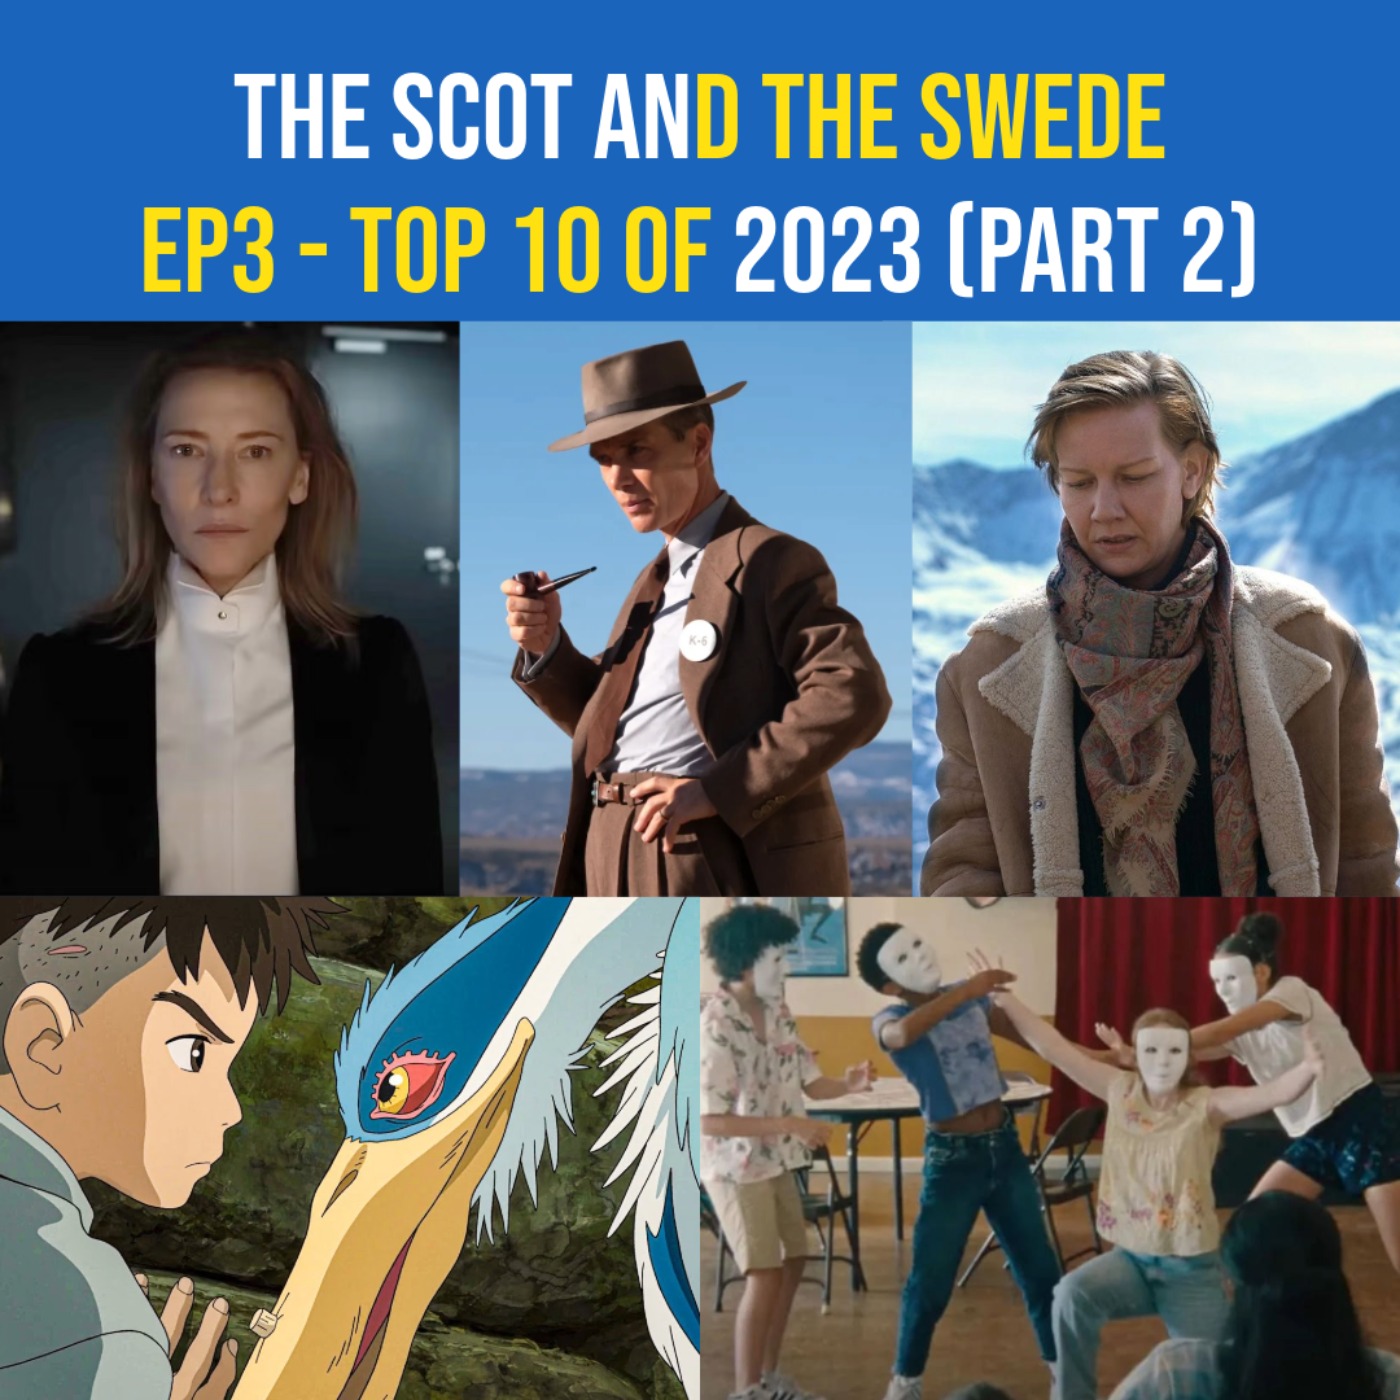 cover art for Ep 3 - Top 10 Films of 2023 (part 2)